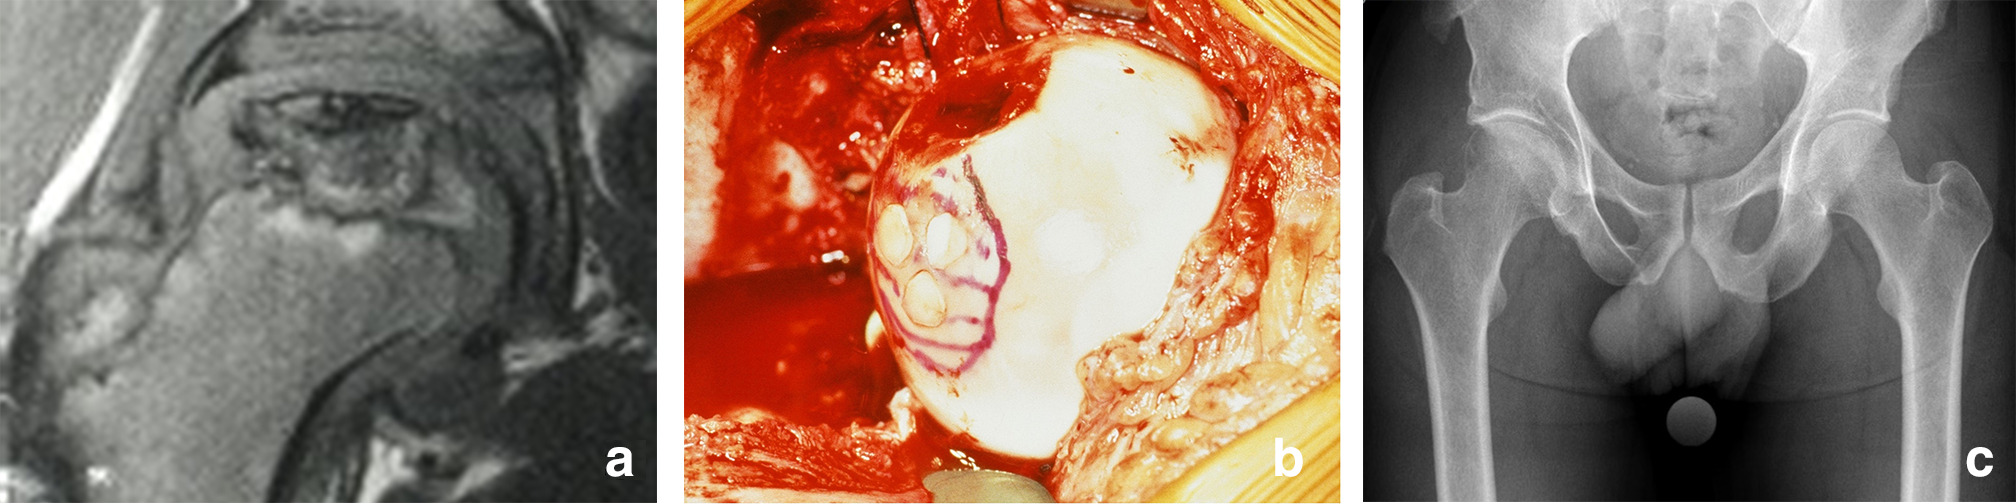 Fig. 4 
          a) Eight-year-old male patient with Perthes’ disease. Coronal MRI indicating the extent of the necrosis as well as a slight lateral extrusion of the femoral head. b) Intraoperative view showing the stabilization of the necrotic area with three osteochondral autografts taken from the ipsilateral knee joint. c) Anteroposterior pelvis views of the same patient at last follow-up, 24.7 years after the index procedure, shows a clinical and radiologically normal right hip joint.
        